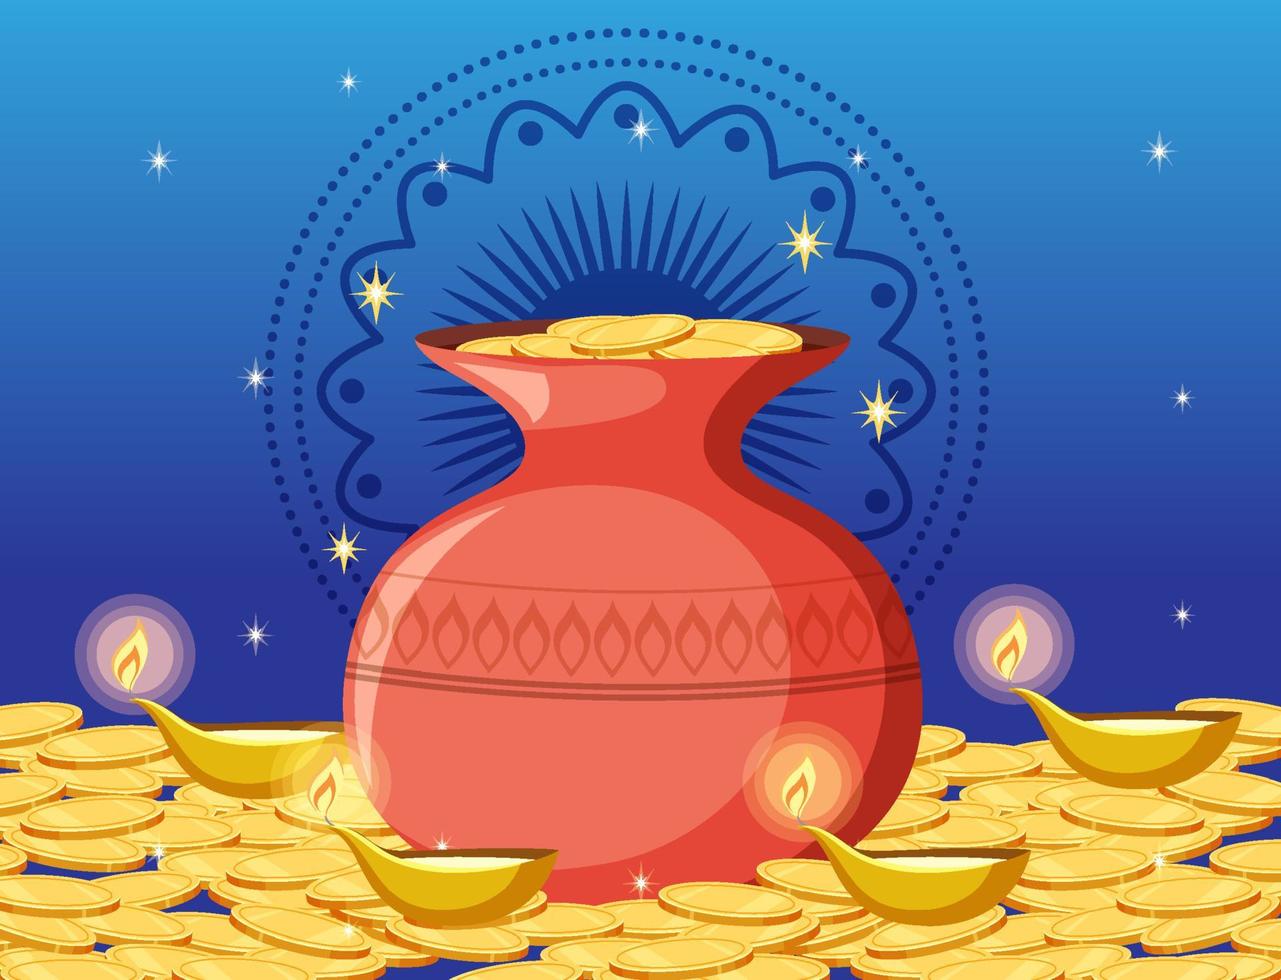 Pot of golden coins and candles vector